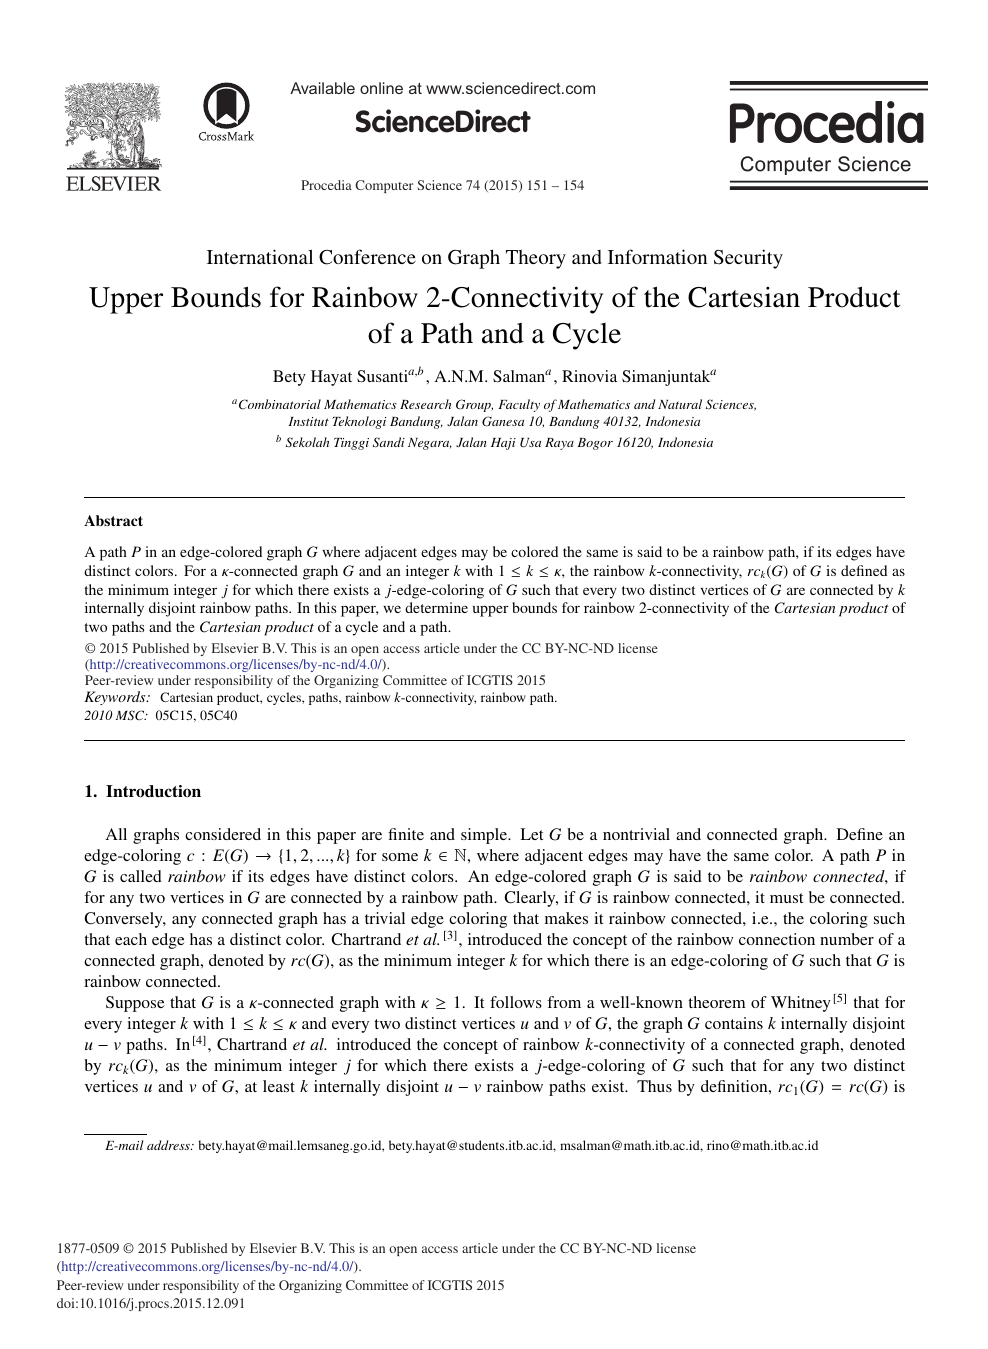 Upper Bounds For Rainbow 2 Connectivity Of The Cartesian Product Of A Path And A Cycle Topic Of Research Paper In Materials Engineering Download Scholarly Article Pdf And Read For Free On